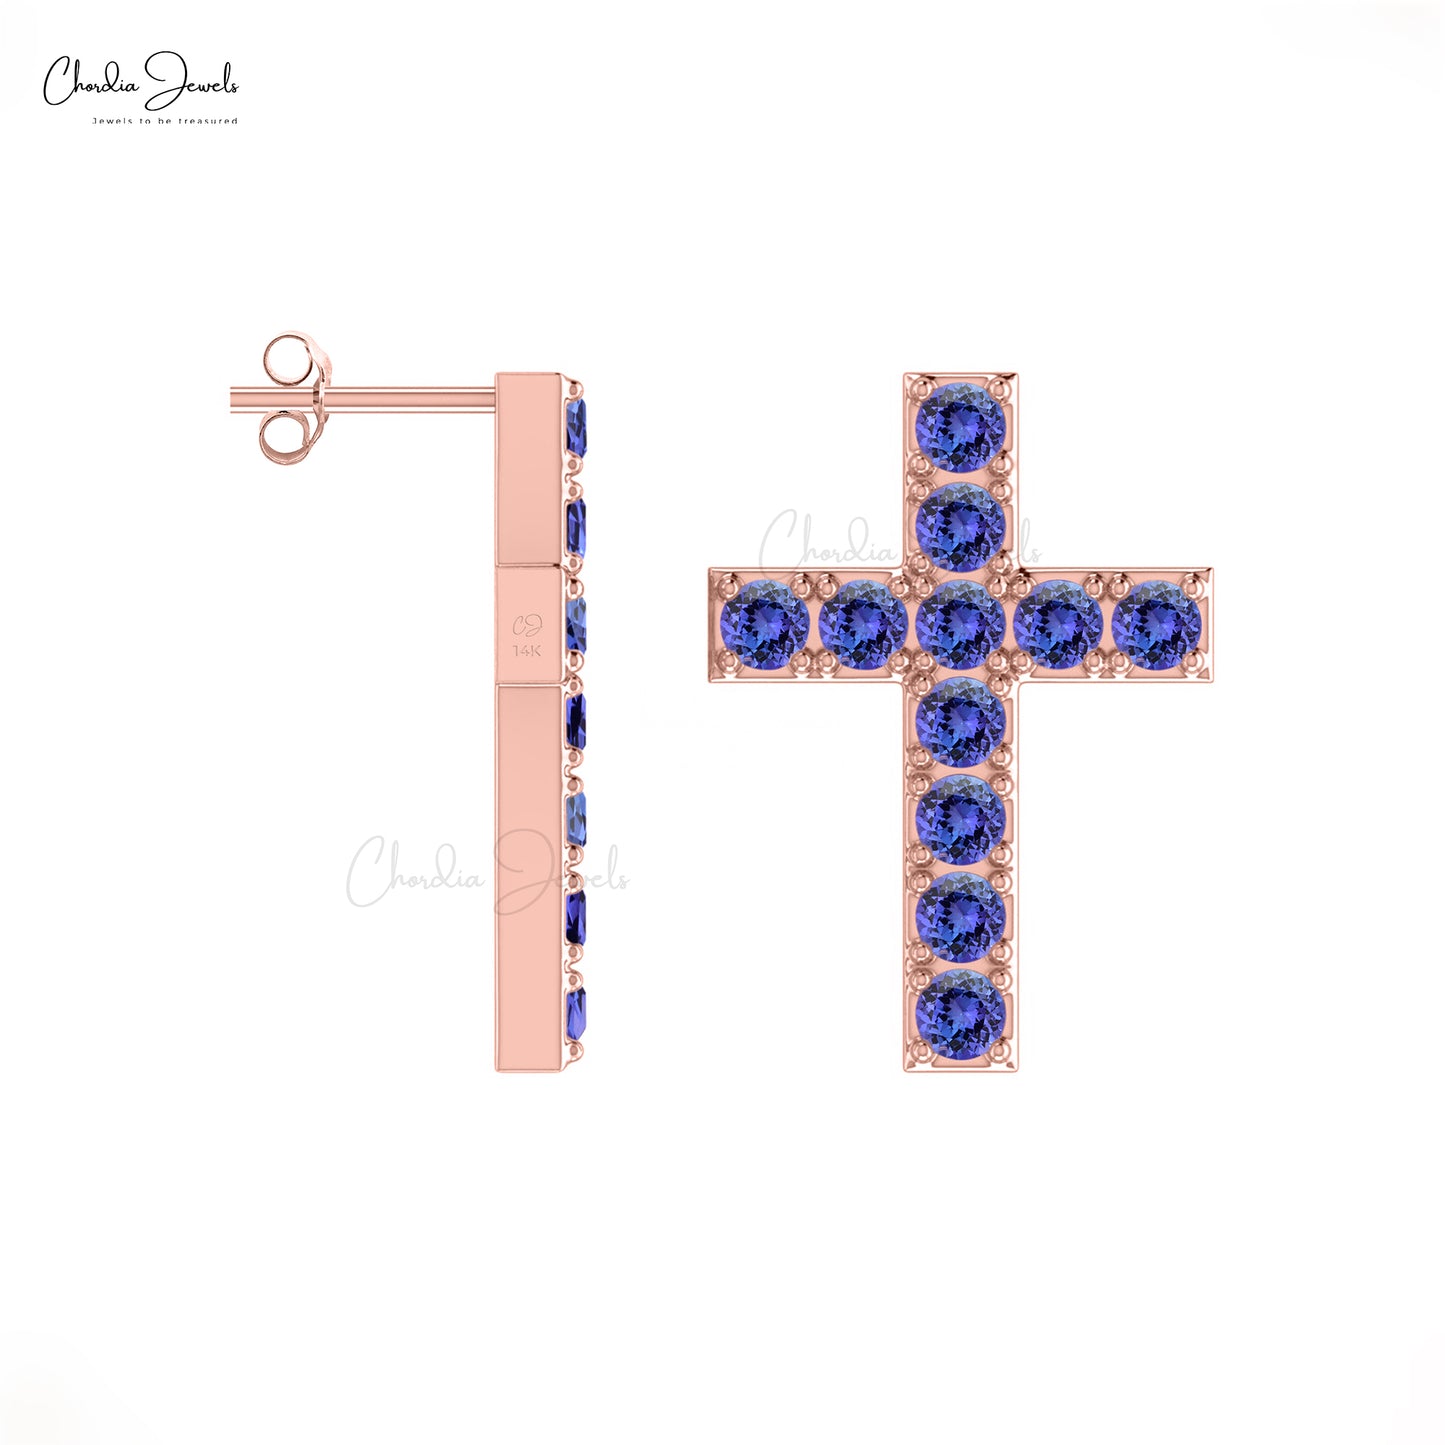 Elegant Tanzanite Cross Studs in 14k Solid Gold Religious 2mm Round-Cut Earrings For Her